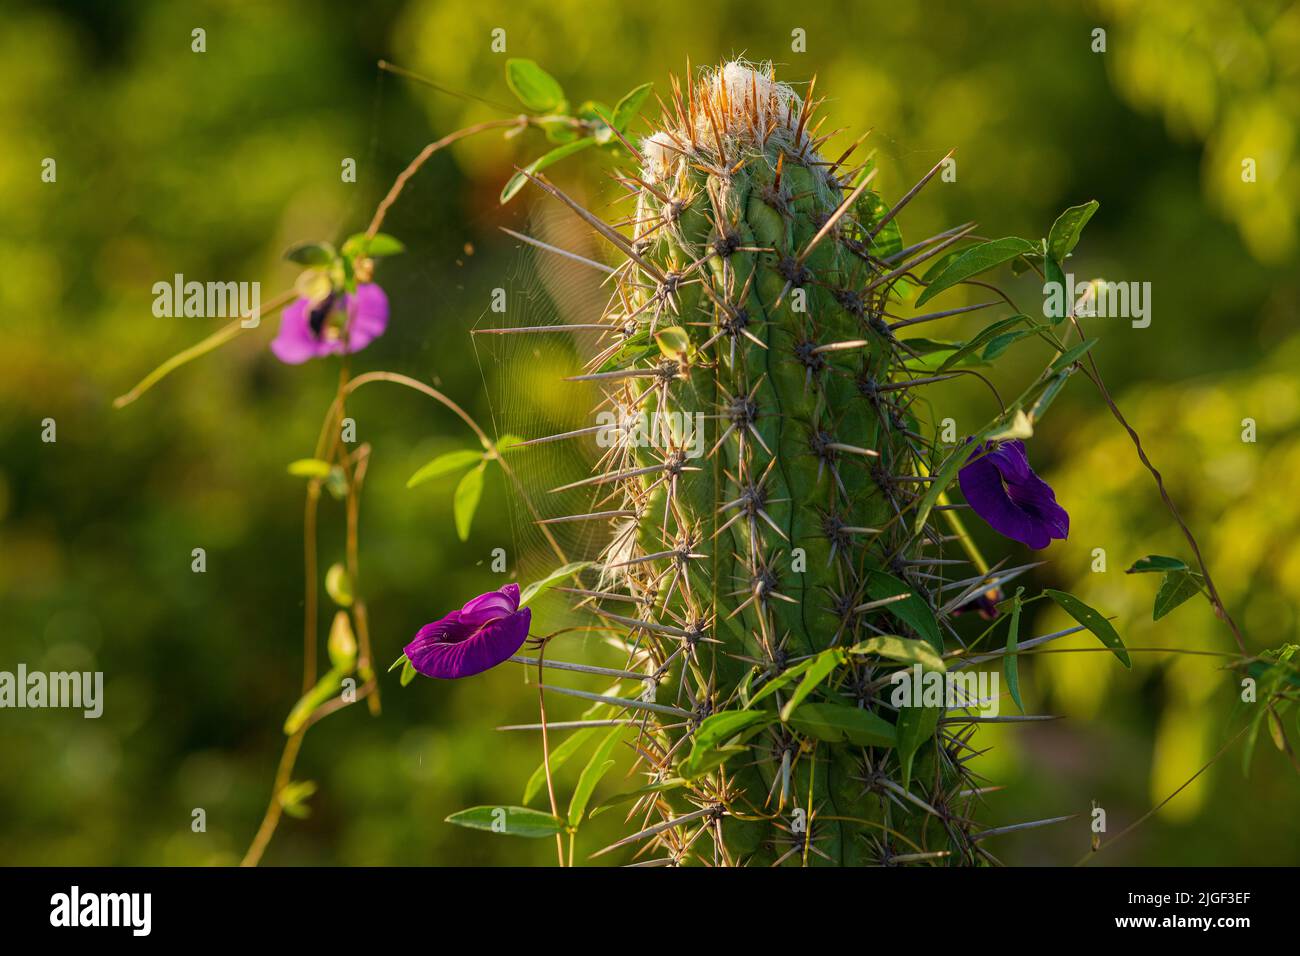 xique-xique cactus detail with herbaceous plants and spider web Stock Photo